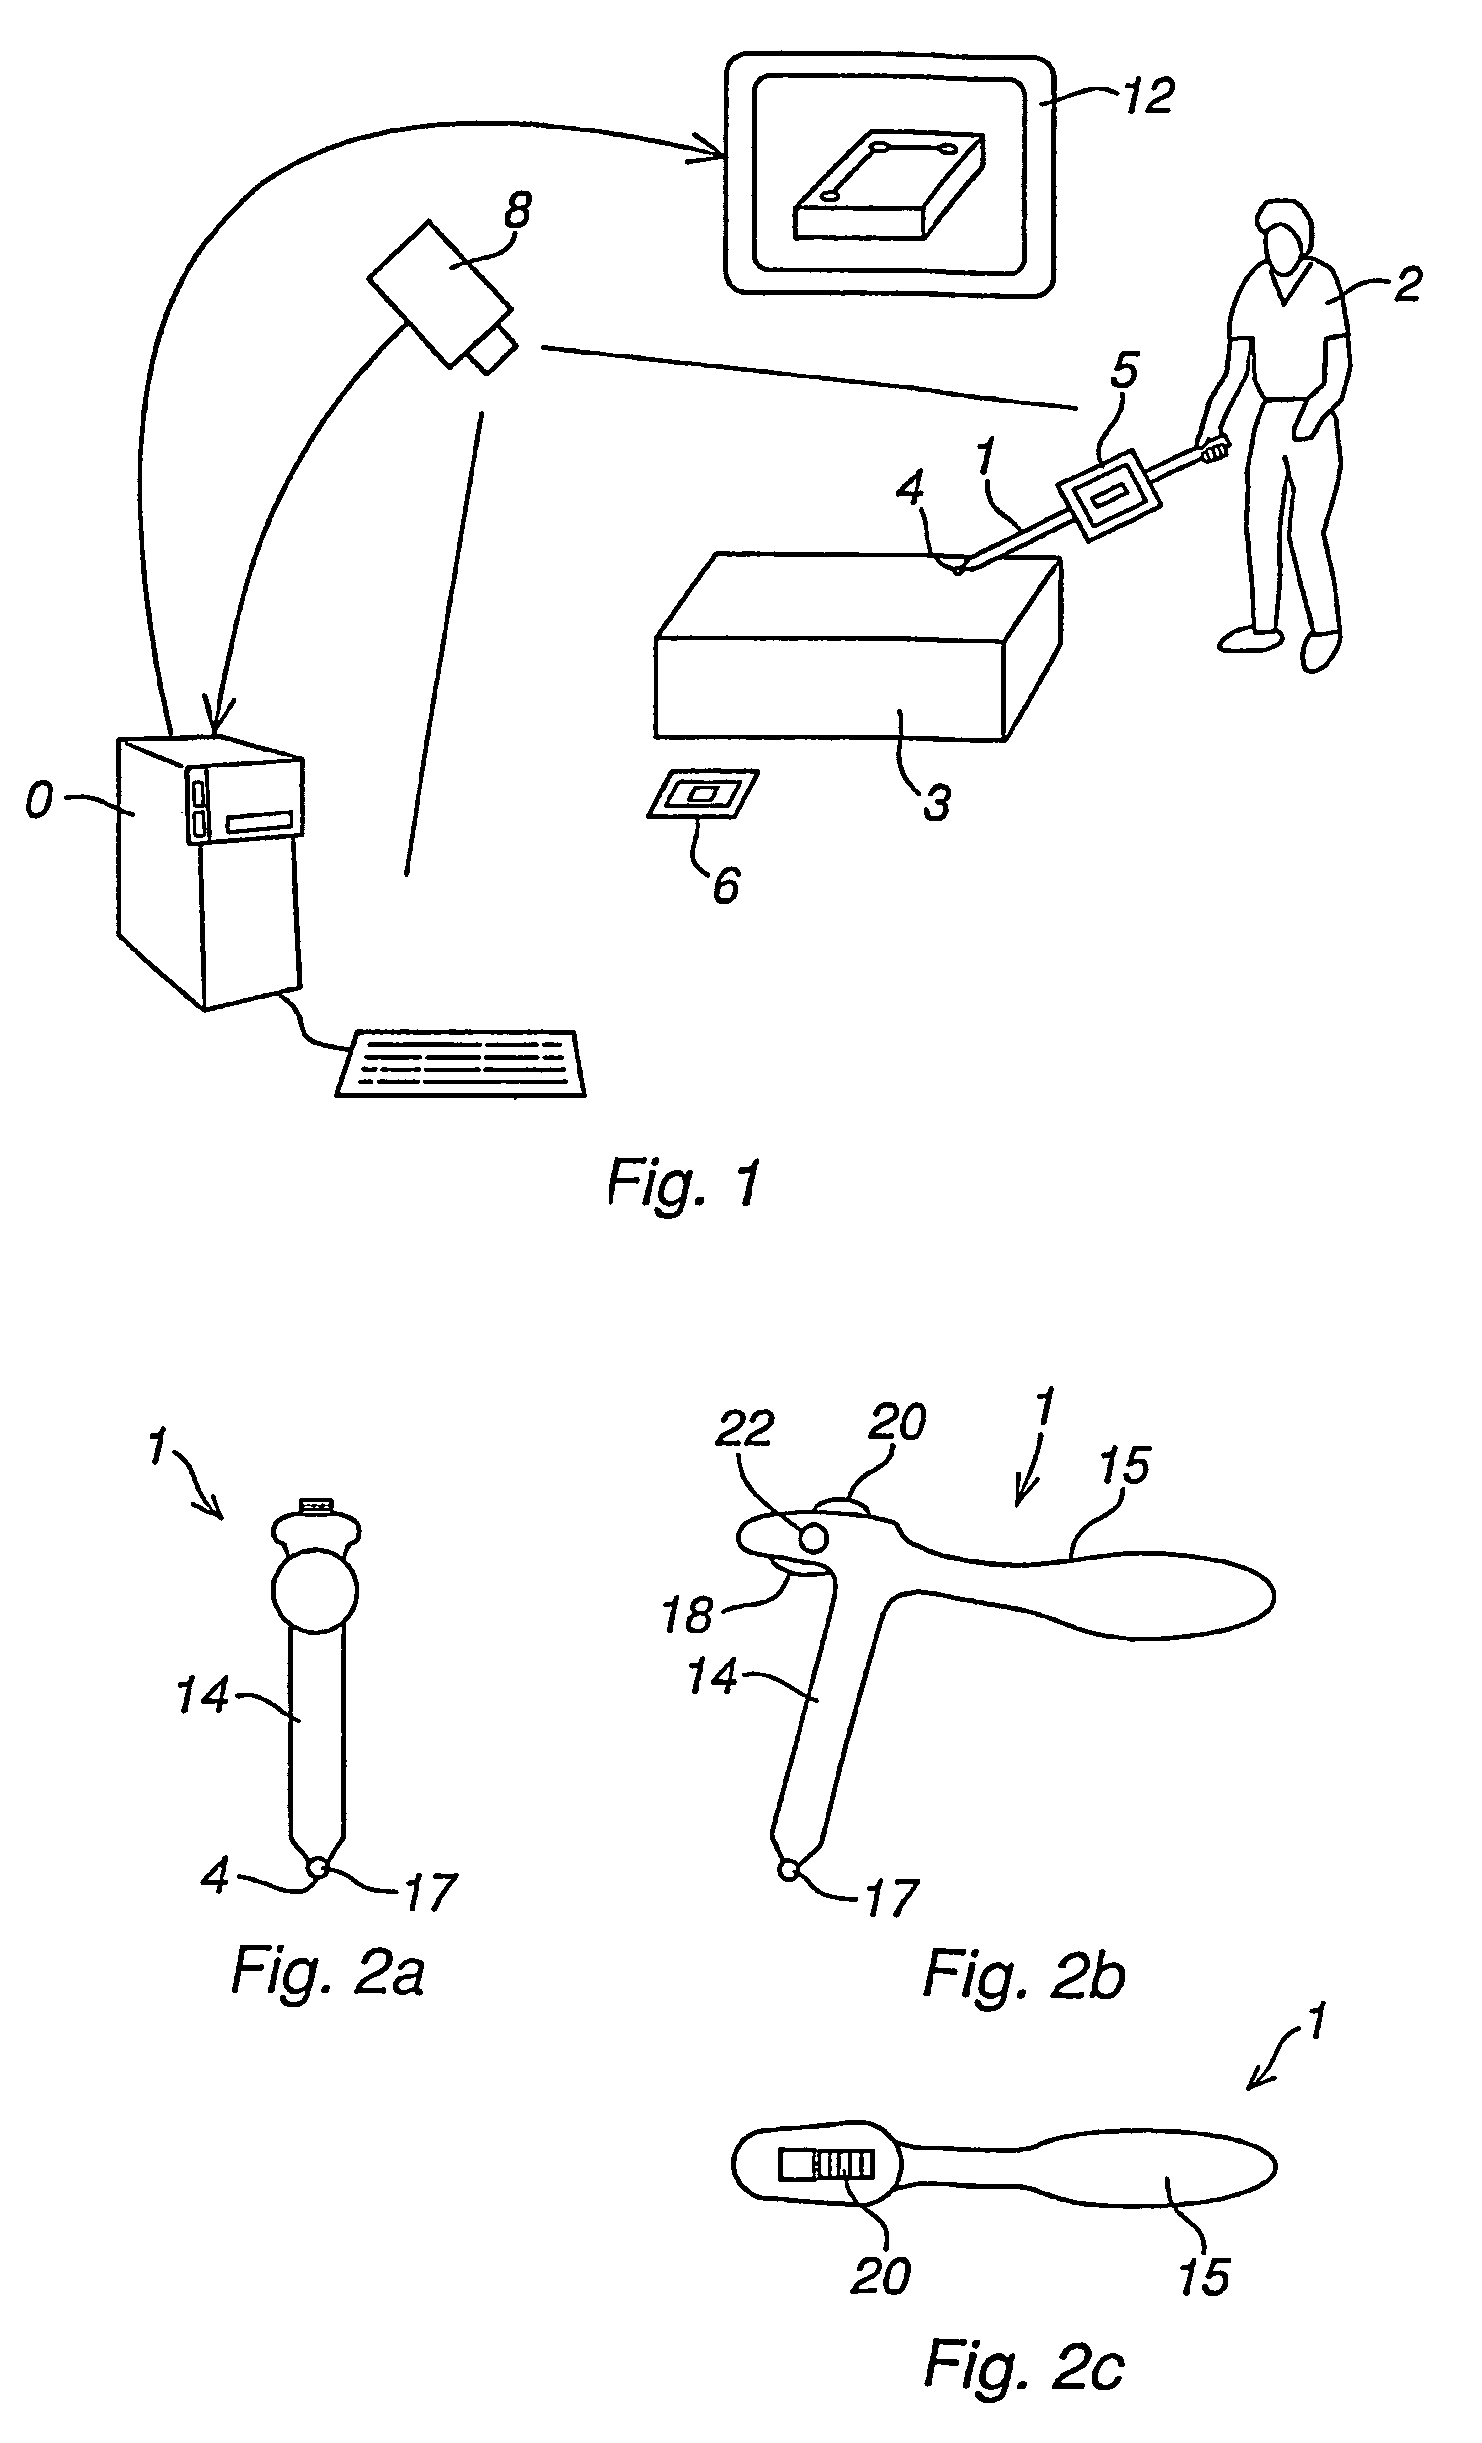 Method and a system for programming an industrial robot